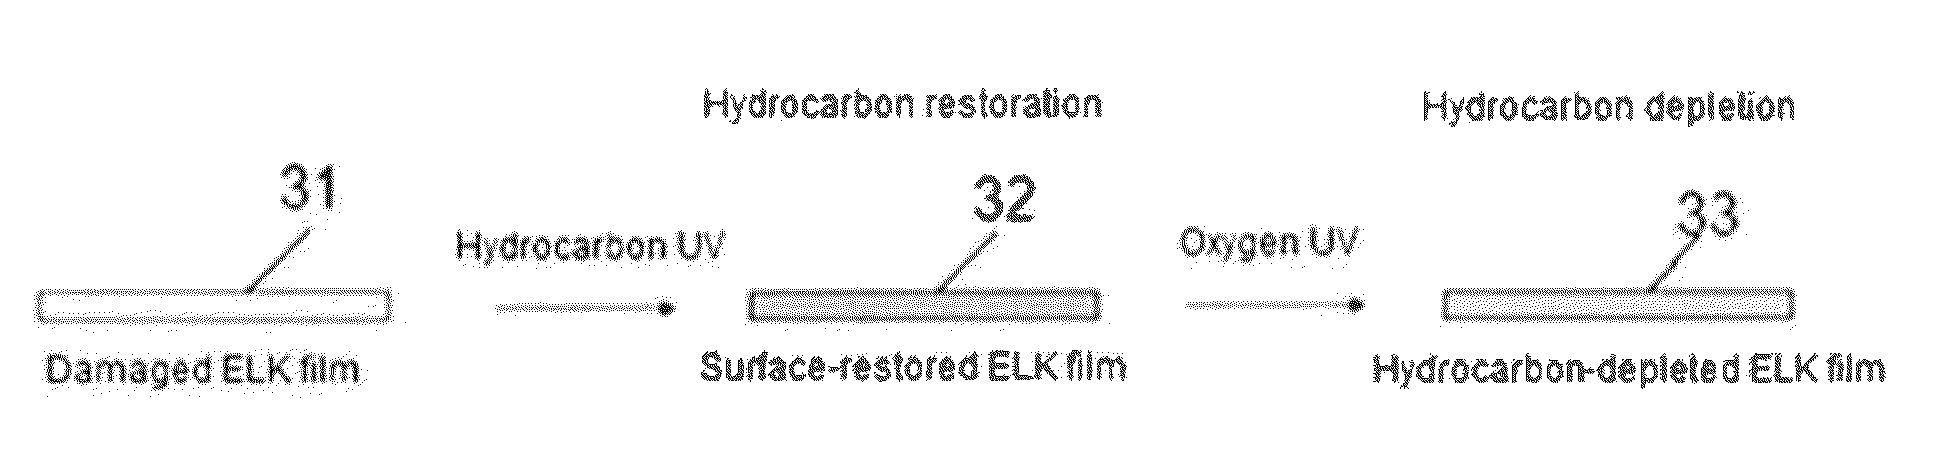 Method for repairing damage of dielectric film by hydrocarbon restoration and hydrocarbon depletion using UV irradiation